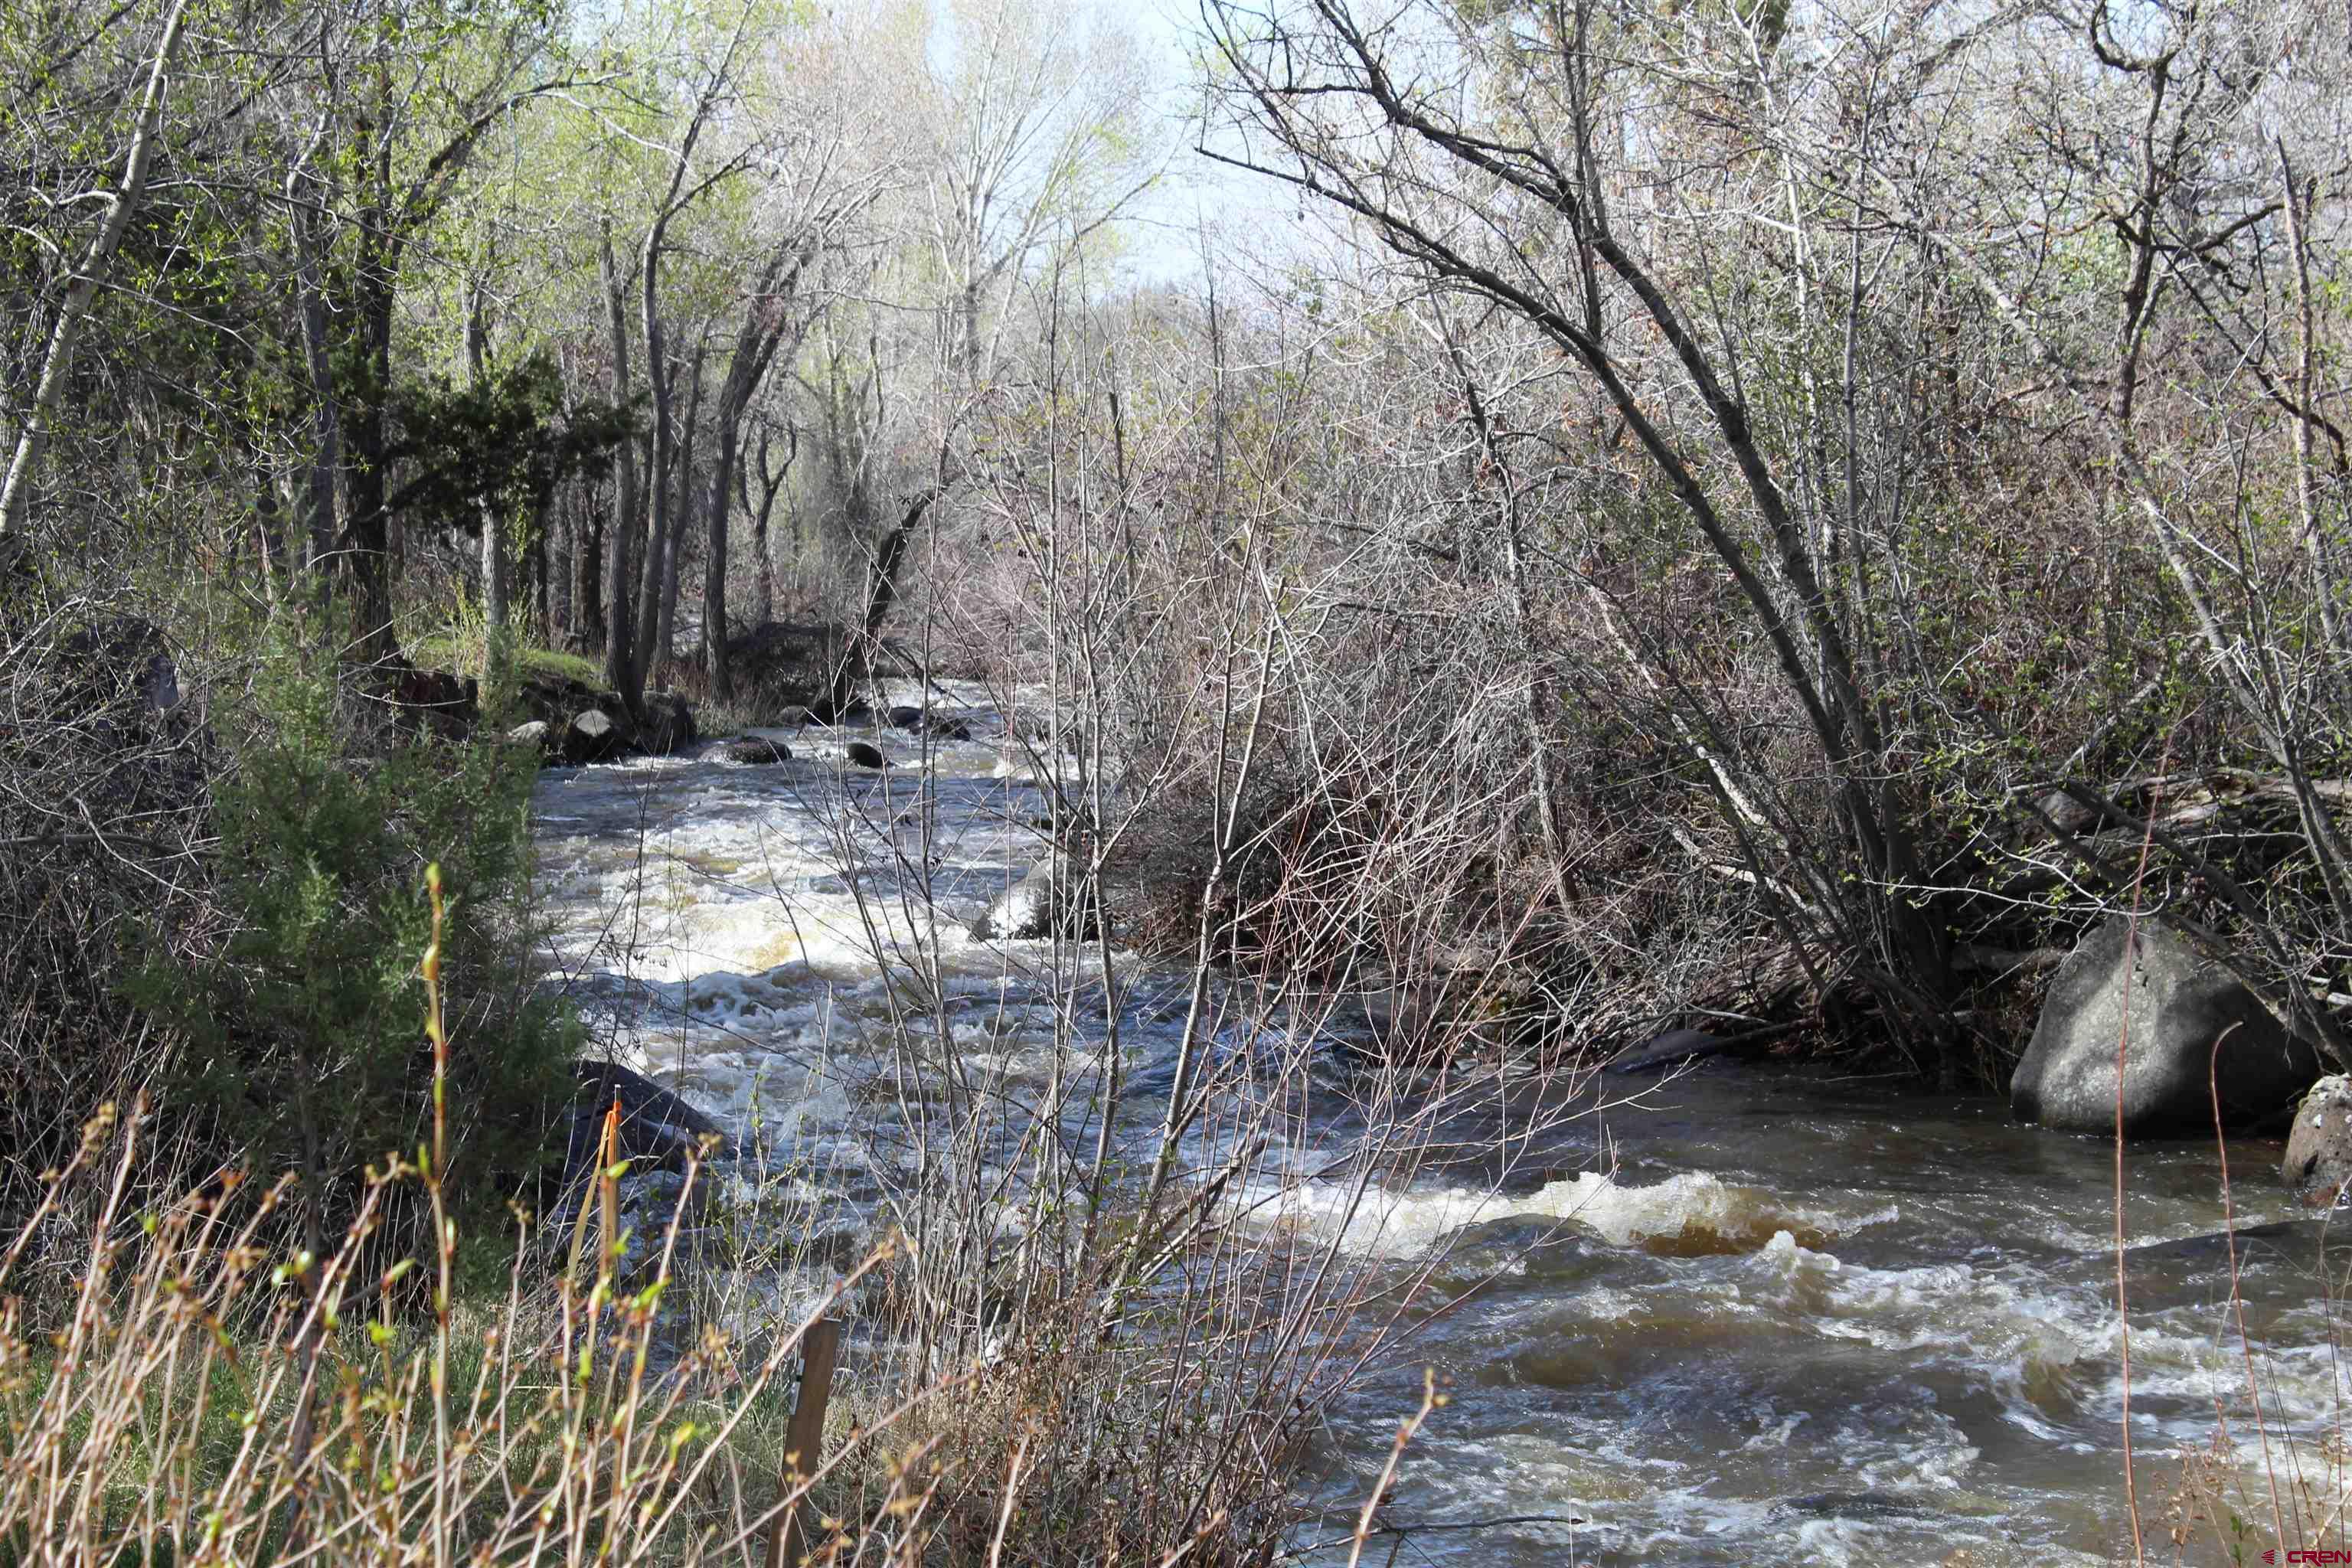 Here's a lot with live water that's hard to find in this part of the country.  This .60 acre lot has Grand Mesa views, lots of trees, and the creek.  Great site to build that dream home!  Secluded back yard backing up to the creek for those park-like setting picnics.  NE 4th street is a dead-end street so not much traffic.  Close to the golf course and not far from the beautiful Grand Mesa.